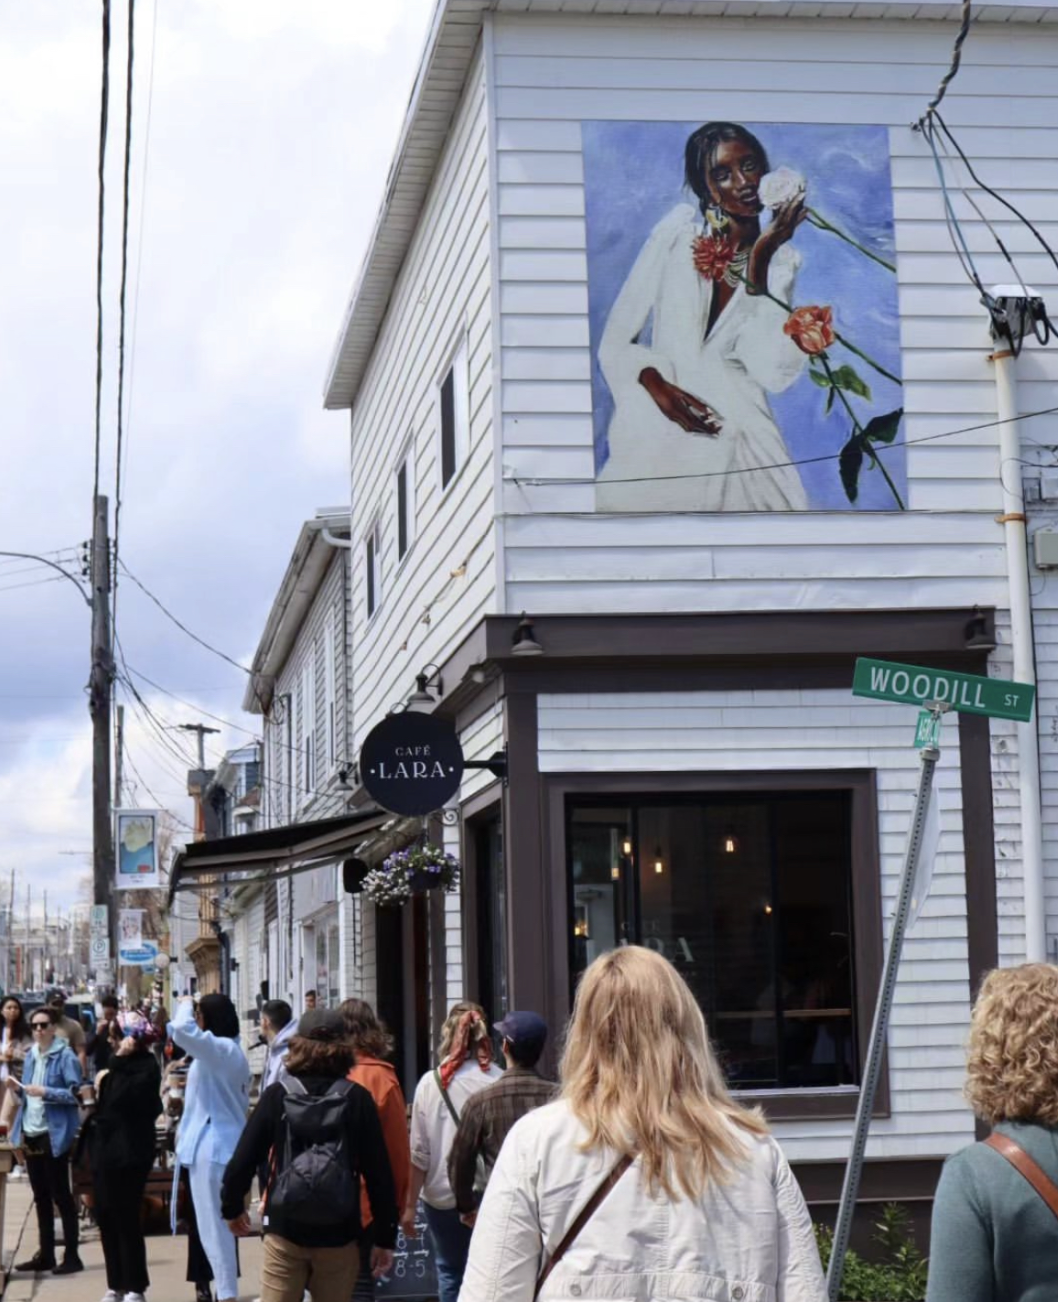 Give Her Flowers, a digitally printed mural on top of Cafe Lara in Halifax by artist Jasmin-Nicole Amoako as part of STEPS Public Art's CreateSpace Public Art Residency